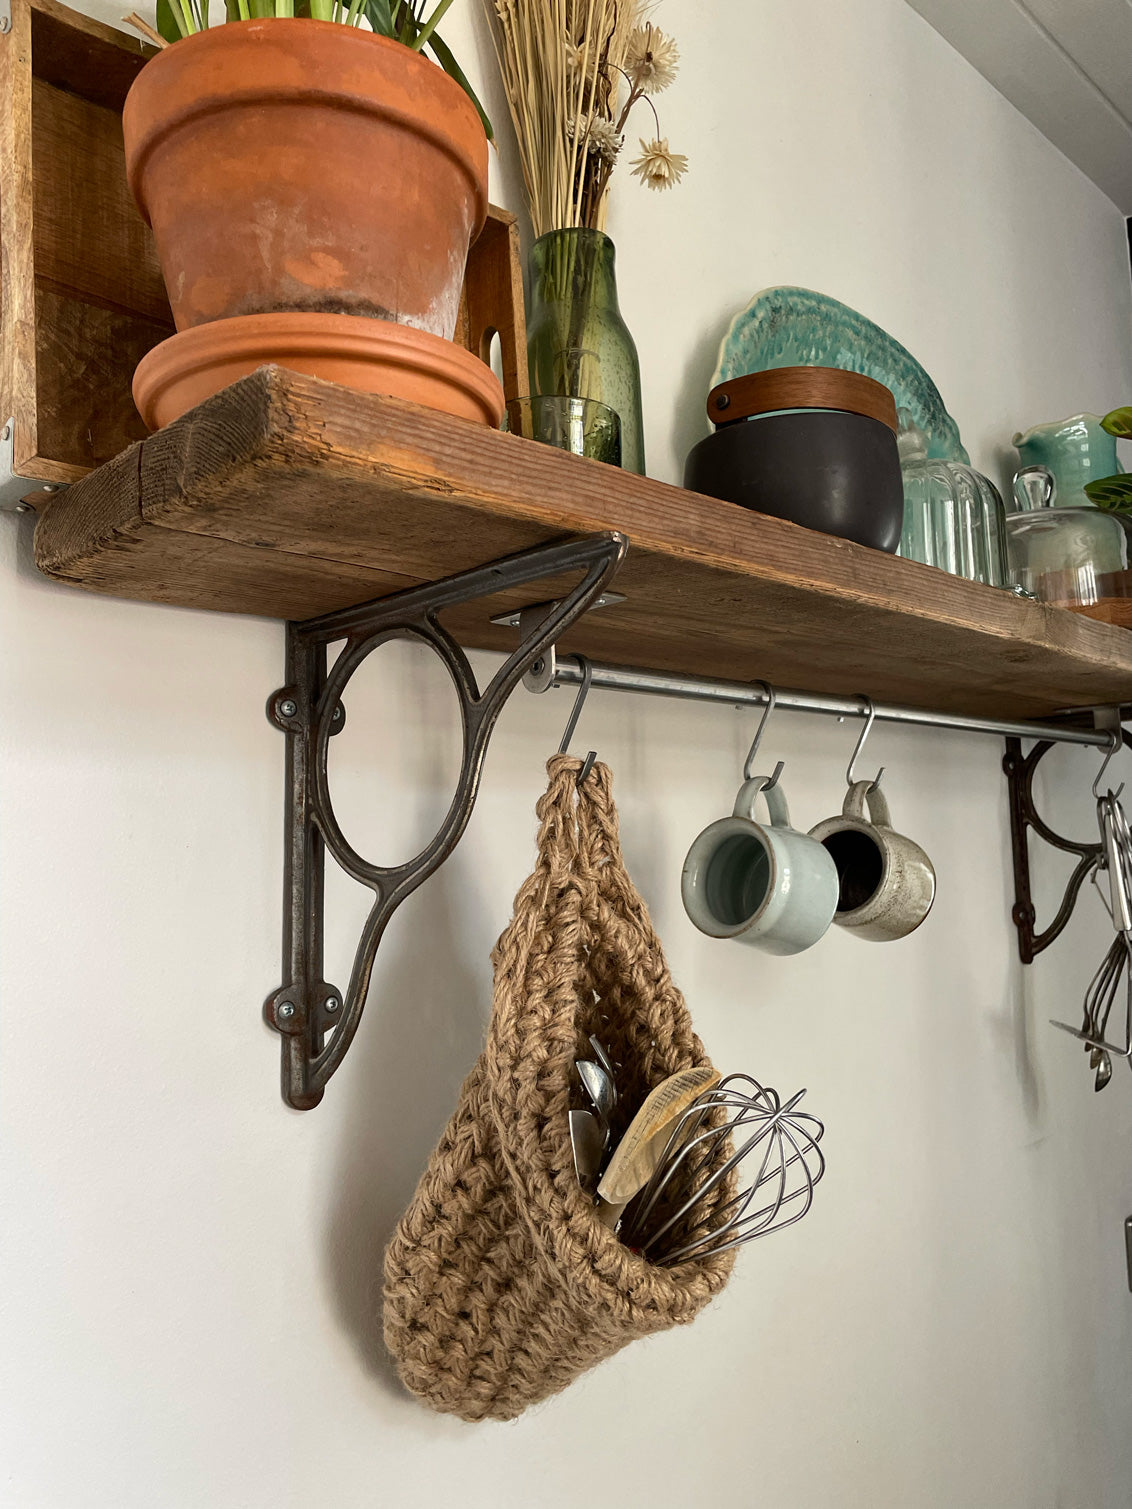 Image showing kitchen shelf with hanging storage bag suspended by a metal hook with handmade storage bag containing kitchen utensils, Jute hanging storage bag holing with whisk and ladle, handmade sustainable crochet decor, rustic natural organic homeware accessories, brown strong jute storage solution, kitchen bathroom bedroom hanging storage bag